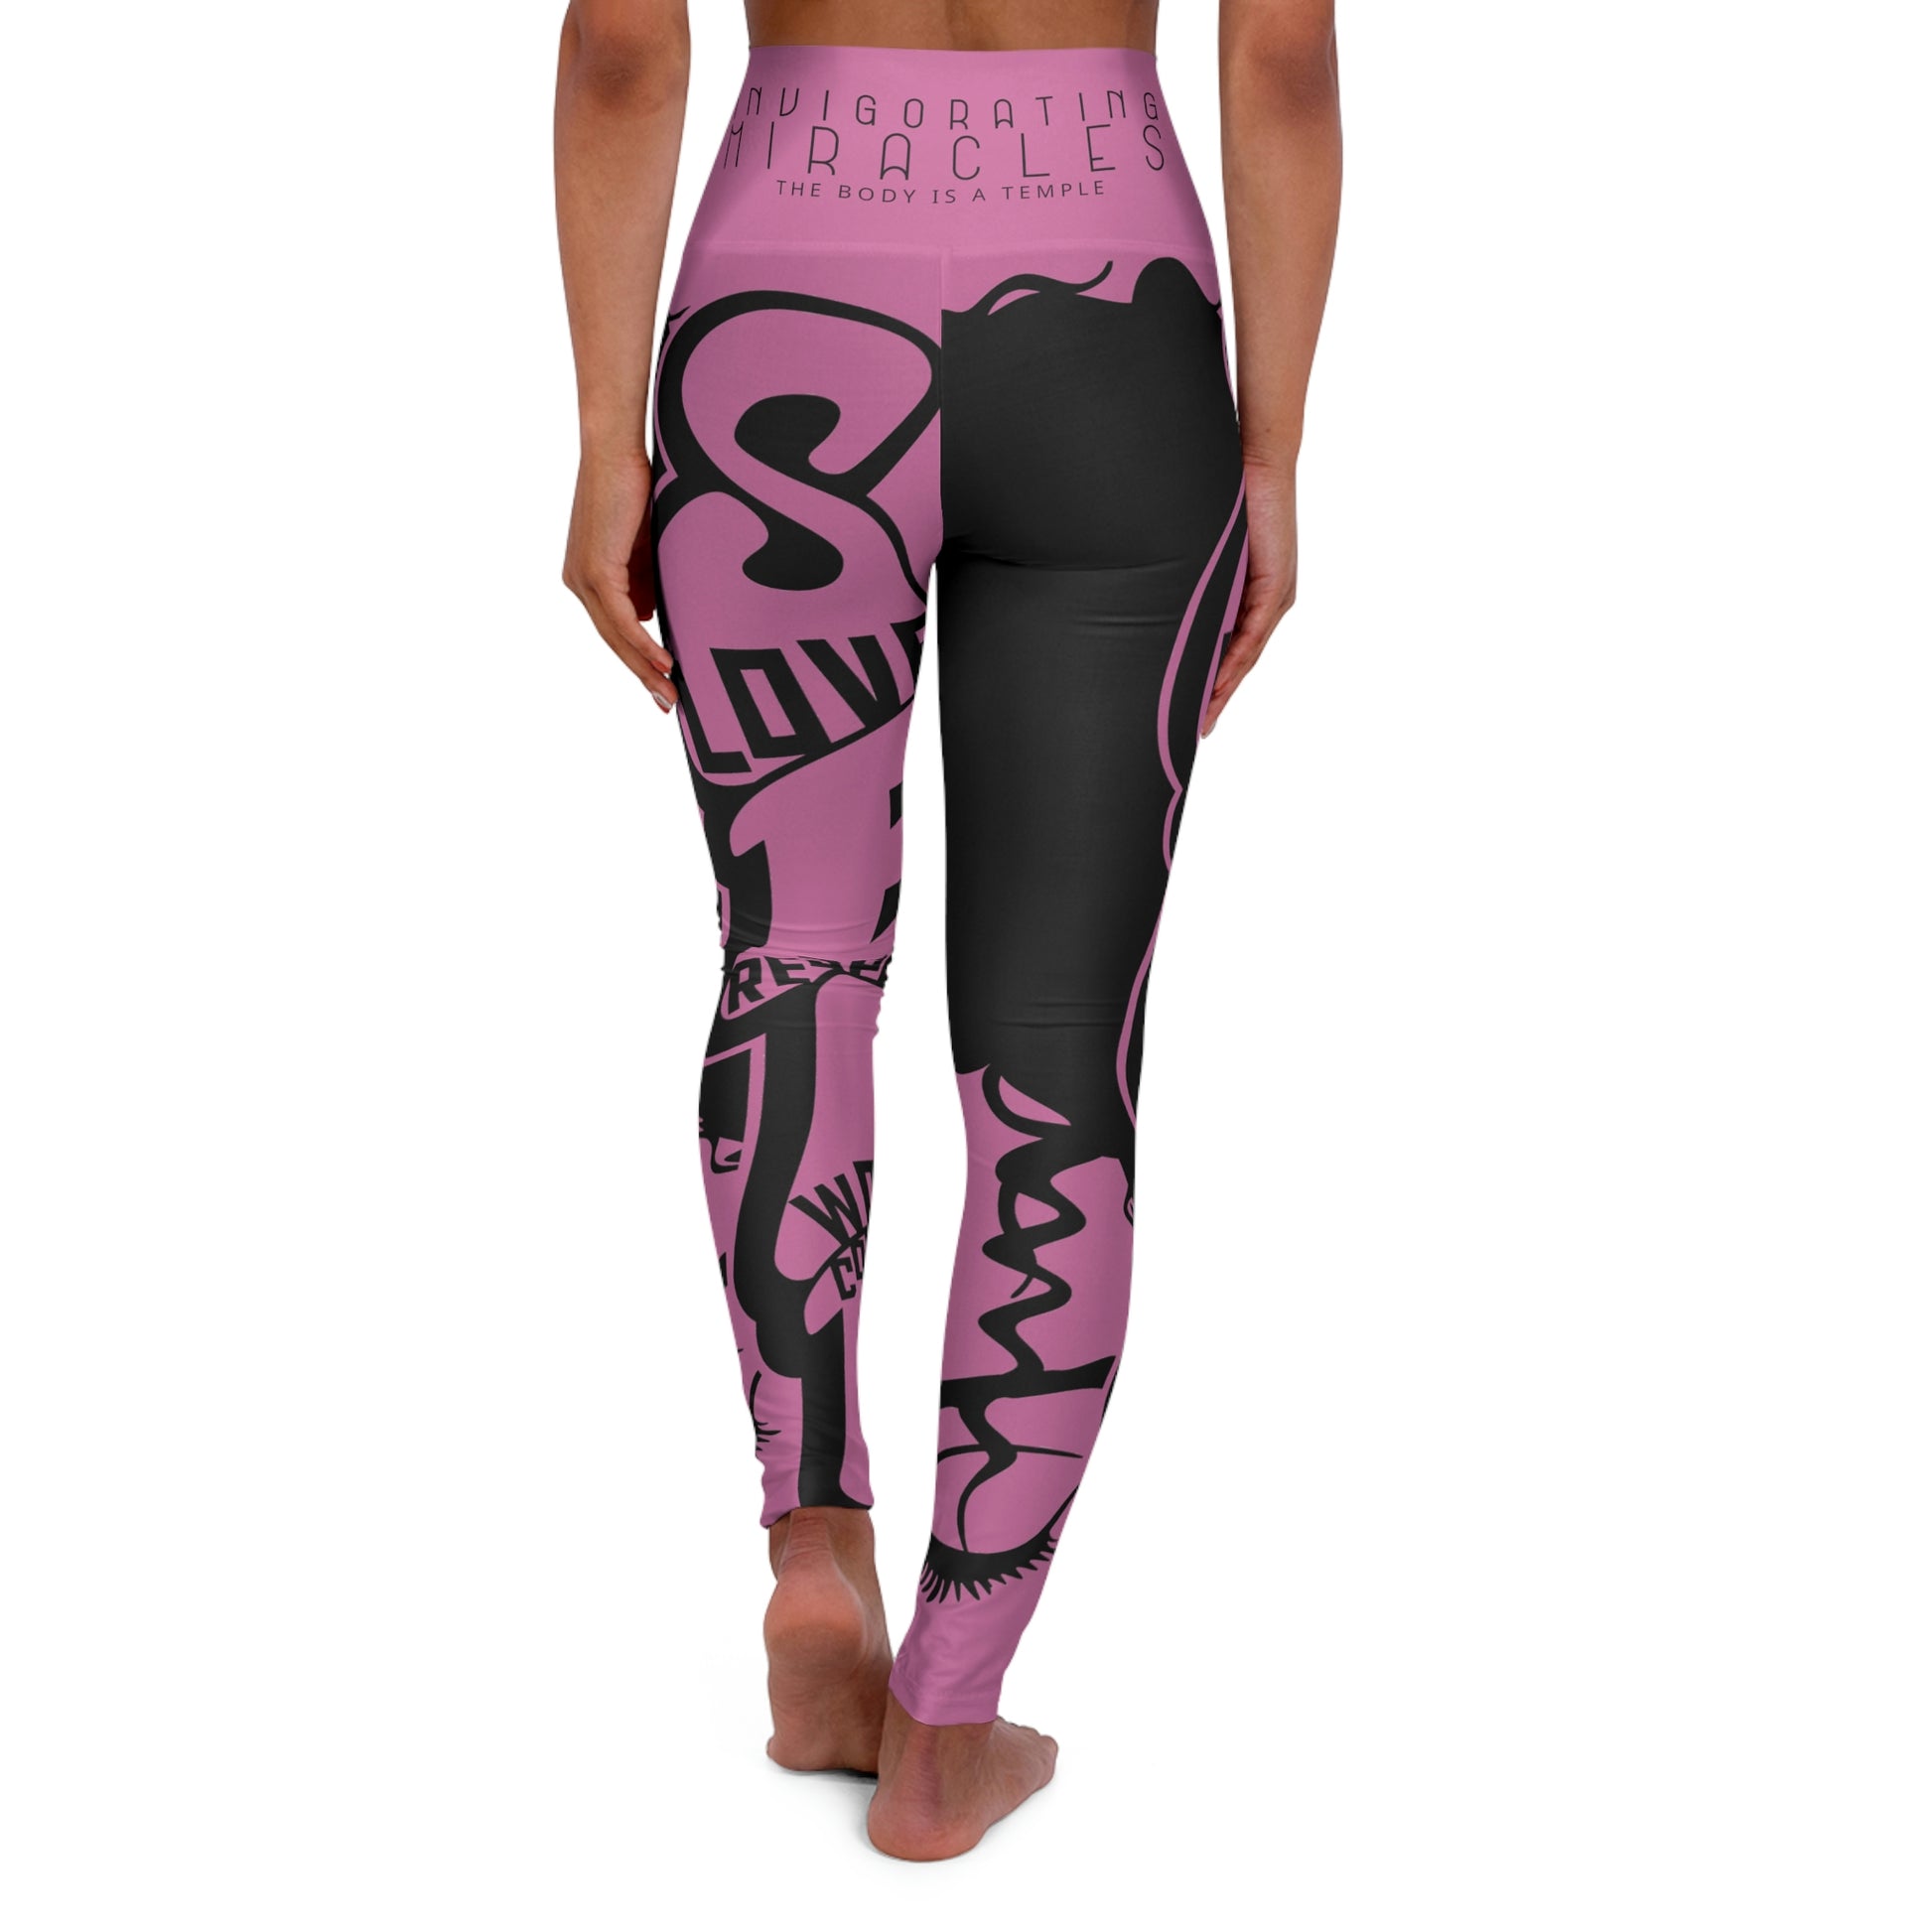 self love journey work out pants